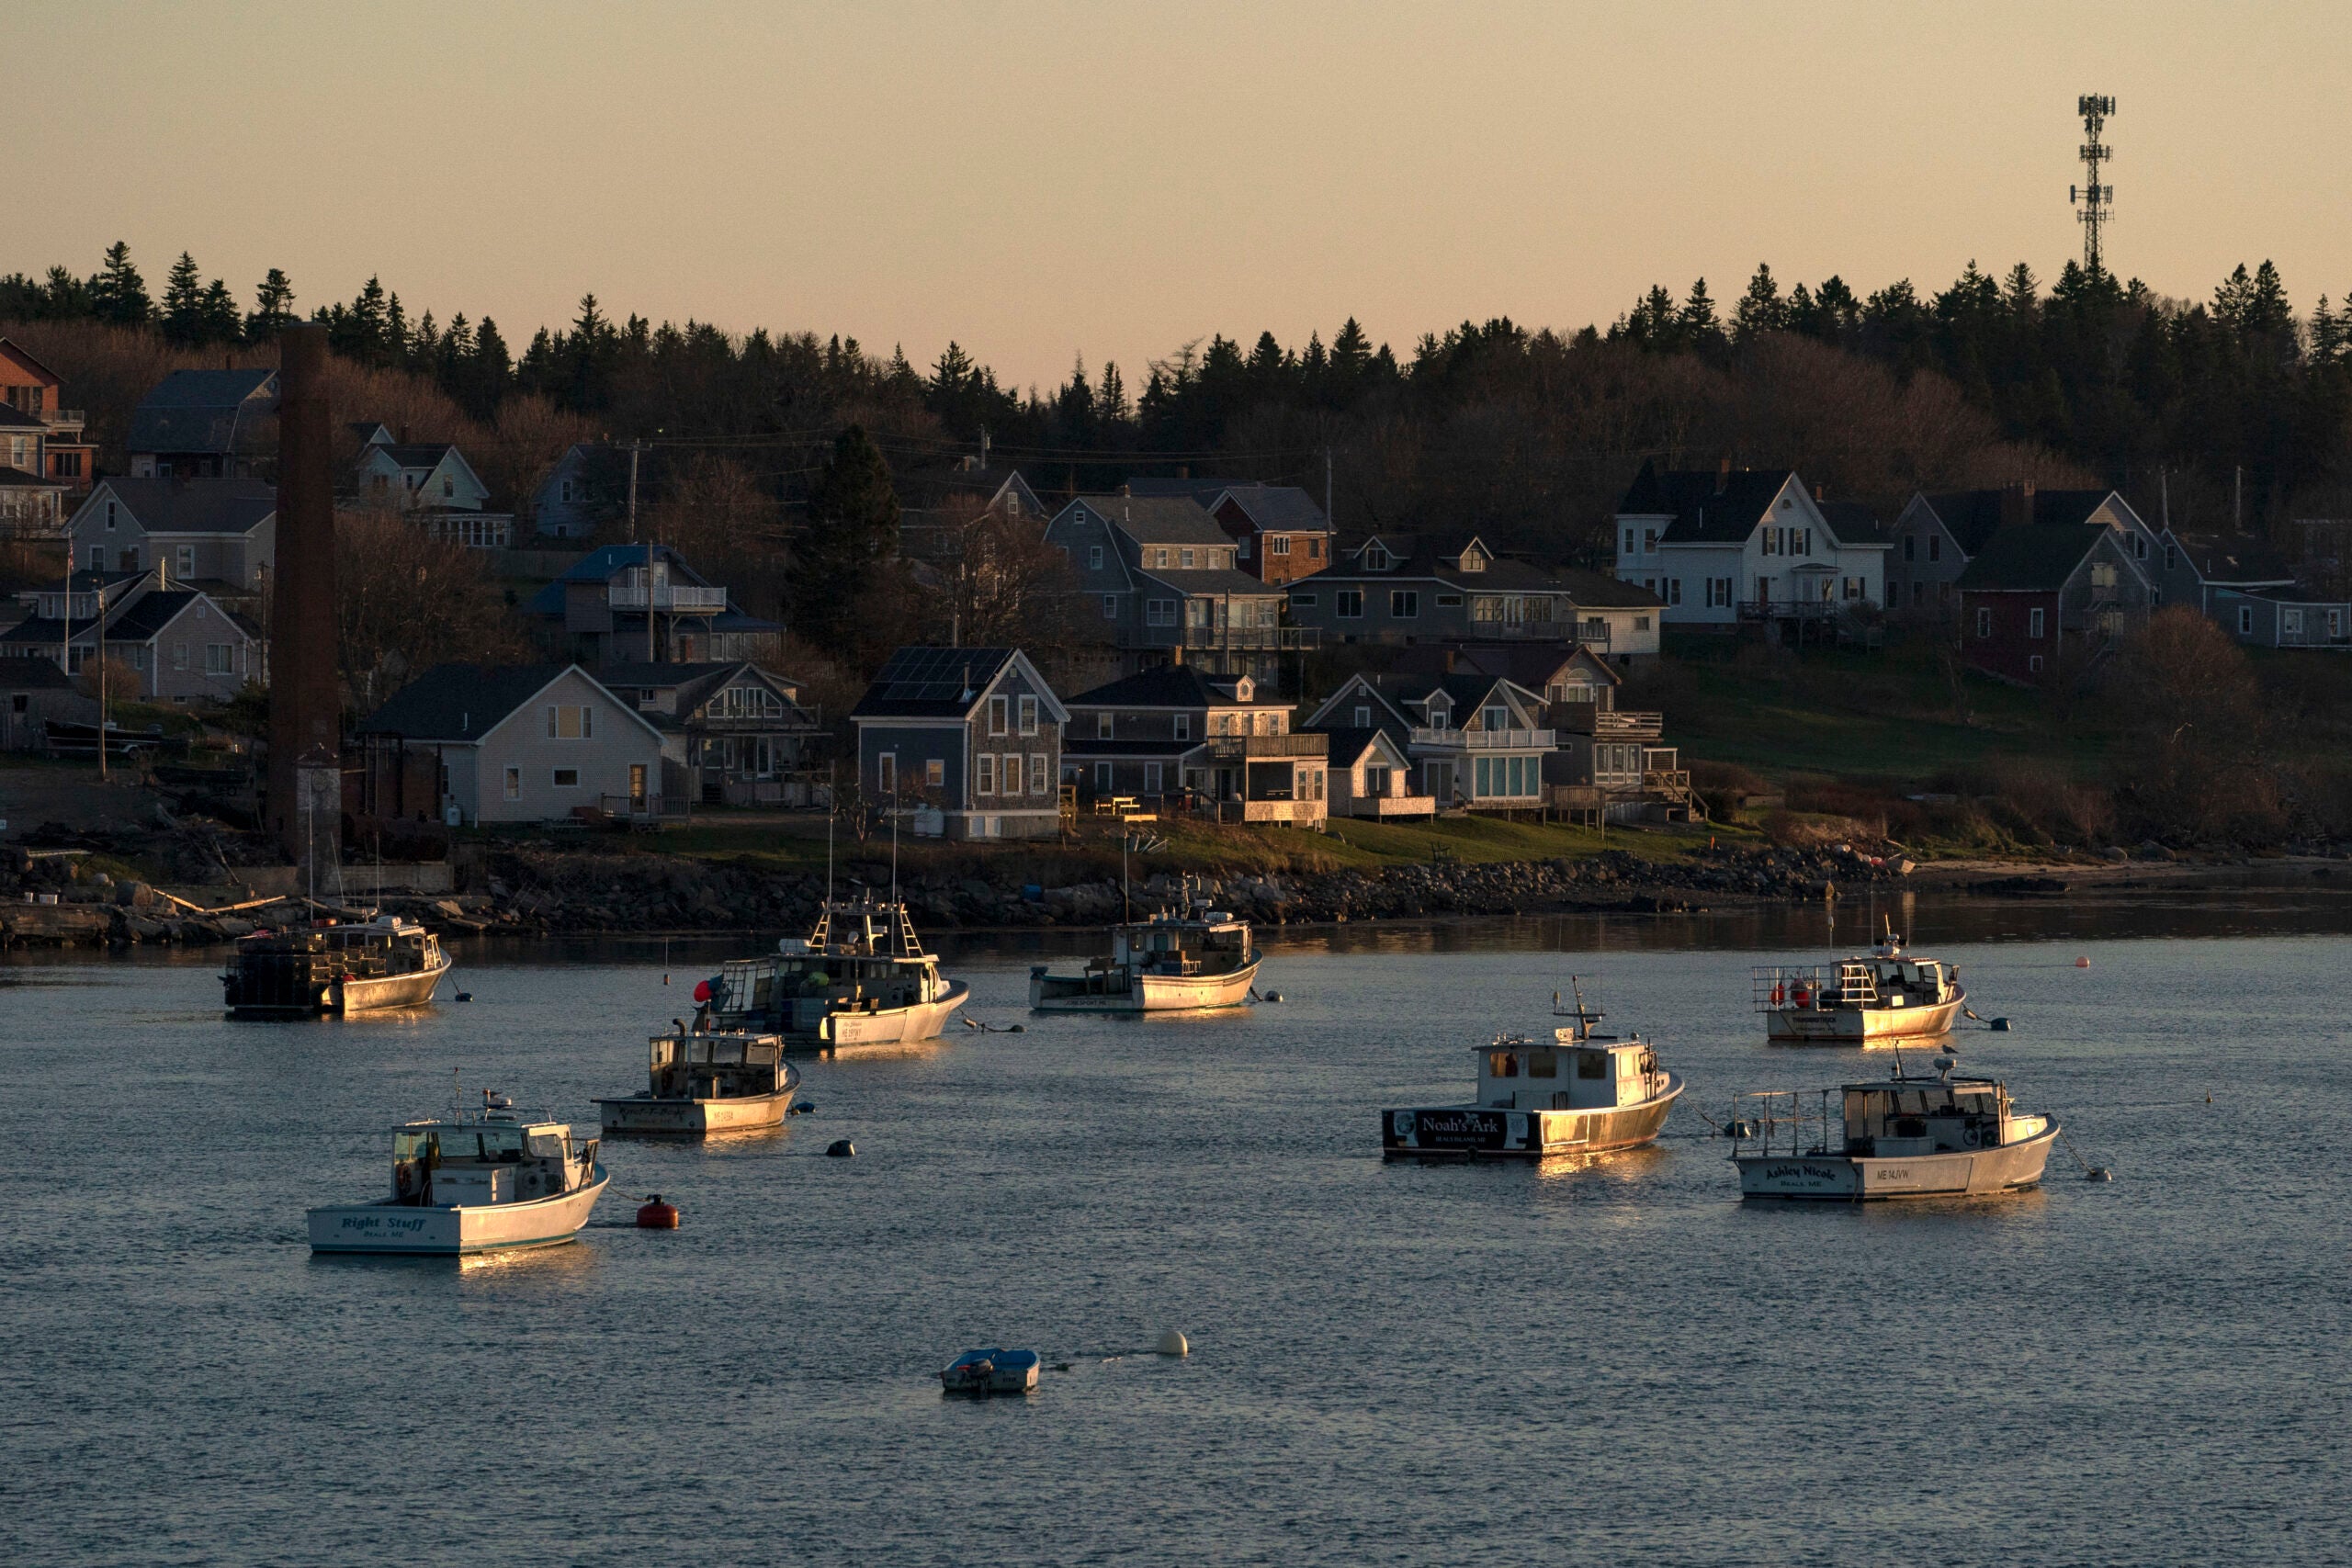 Lobster boats sit at their moorings in Jonesport, Maine.